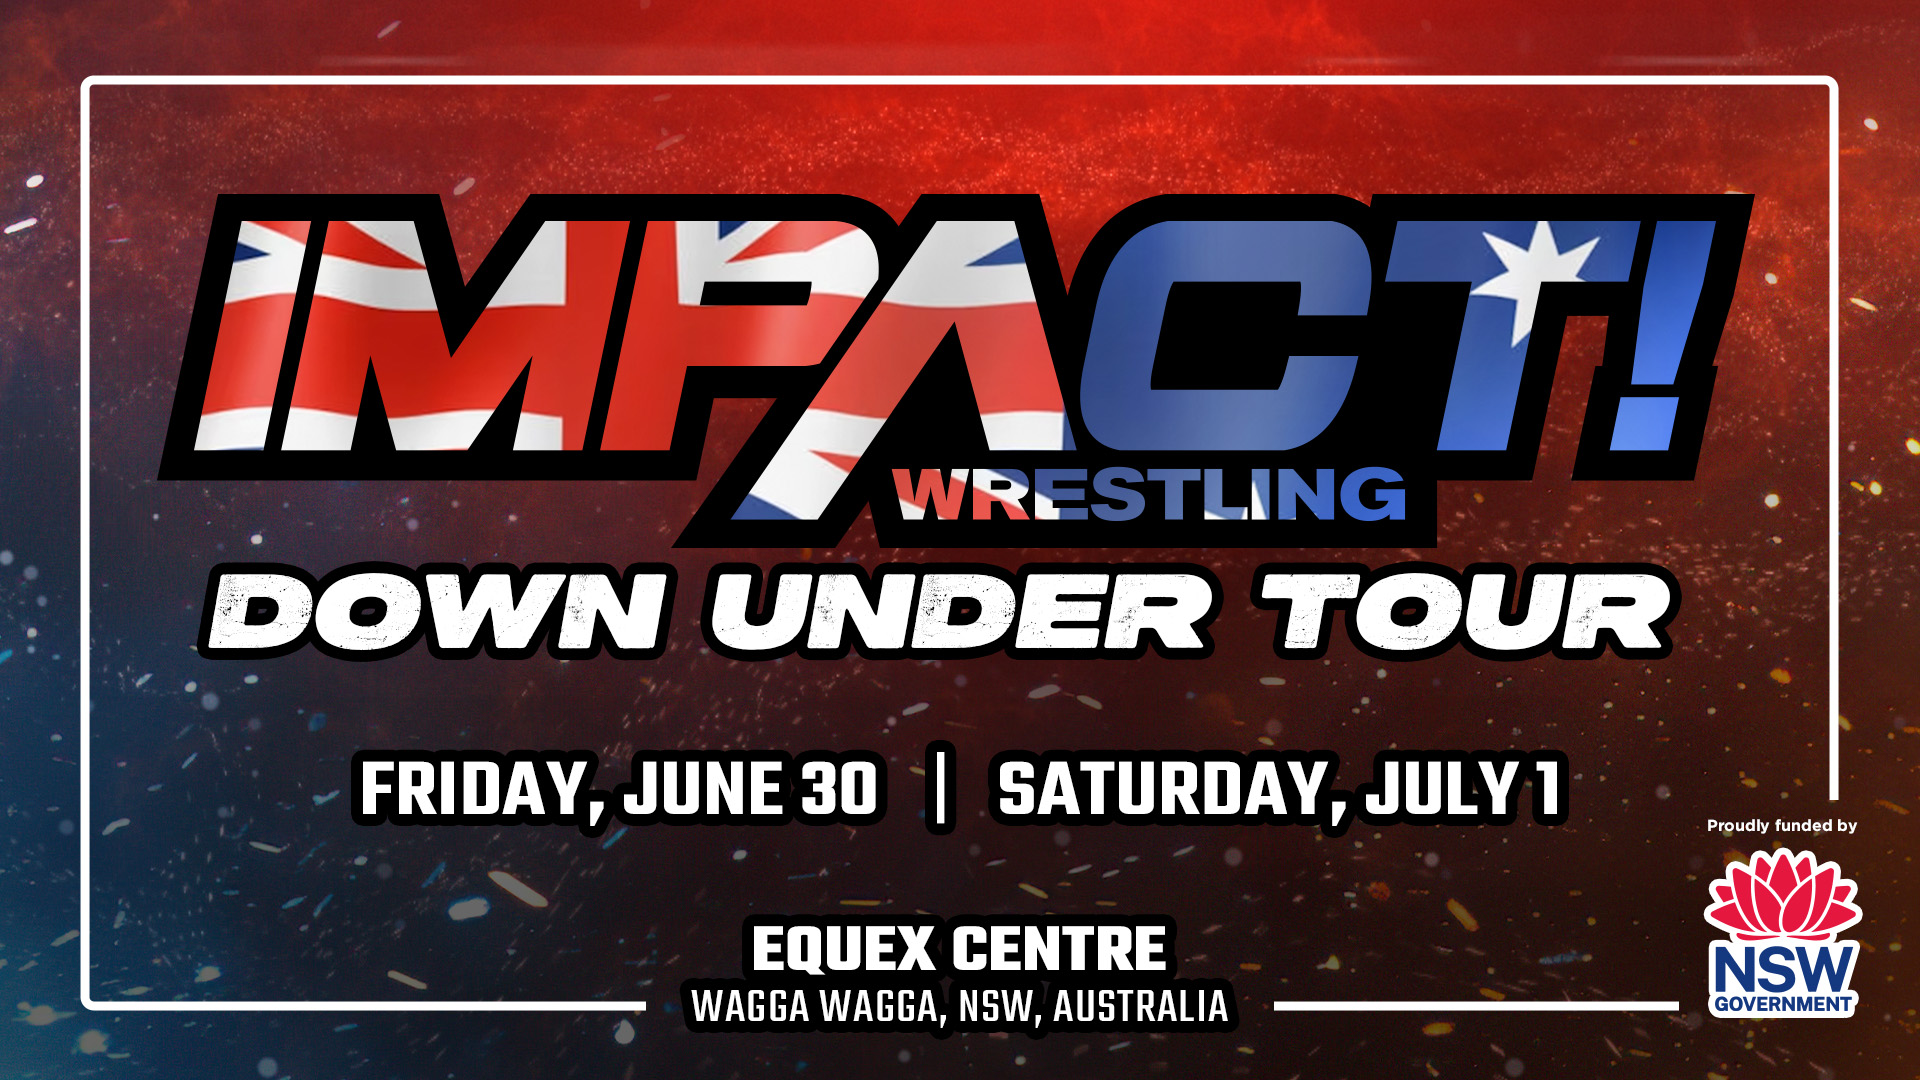 IMPACT Wrestling Announces 2 Shows This Summer In Australia (Winter, Down Under) – IMPACT Wrestling